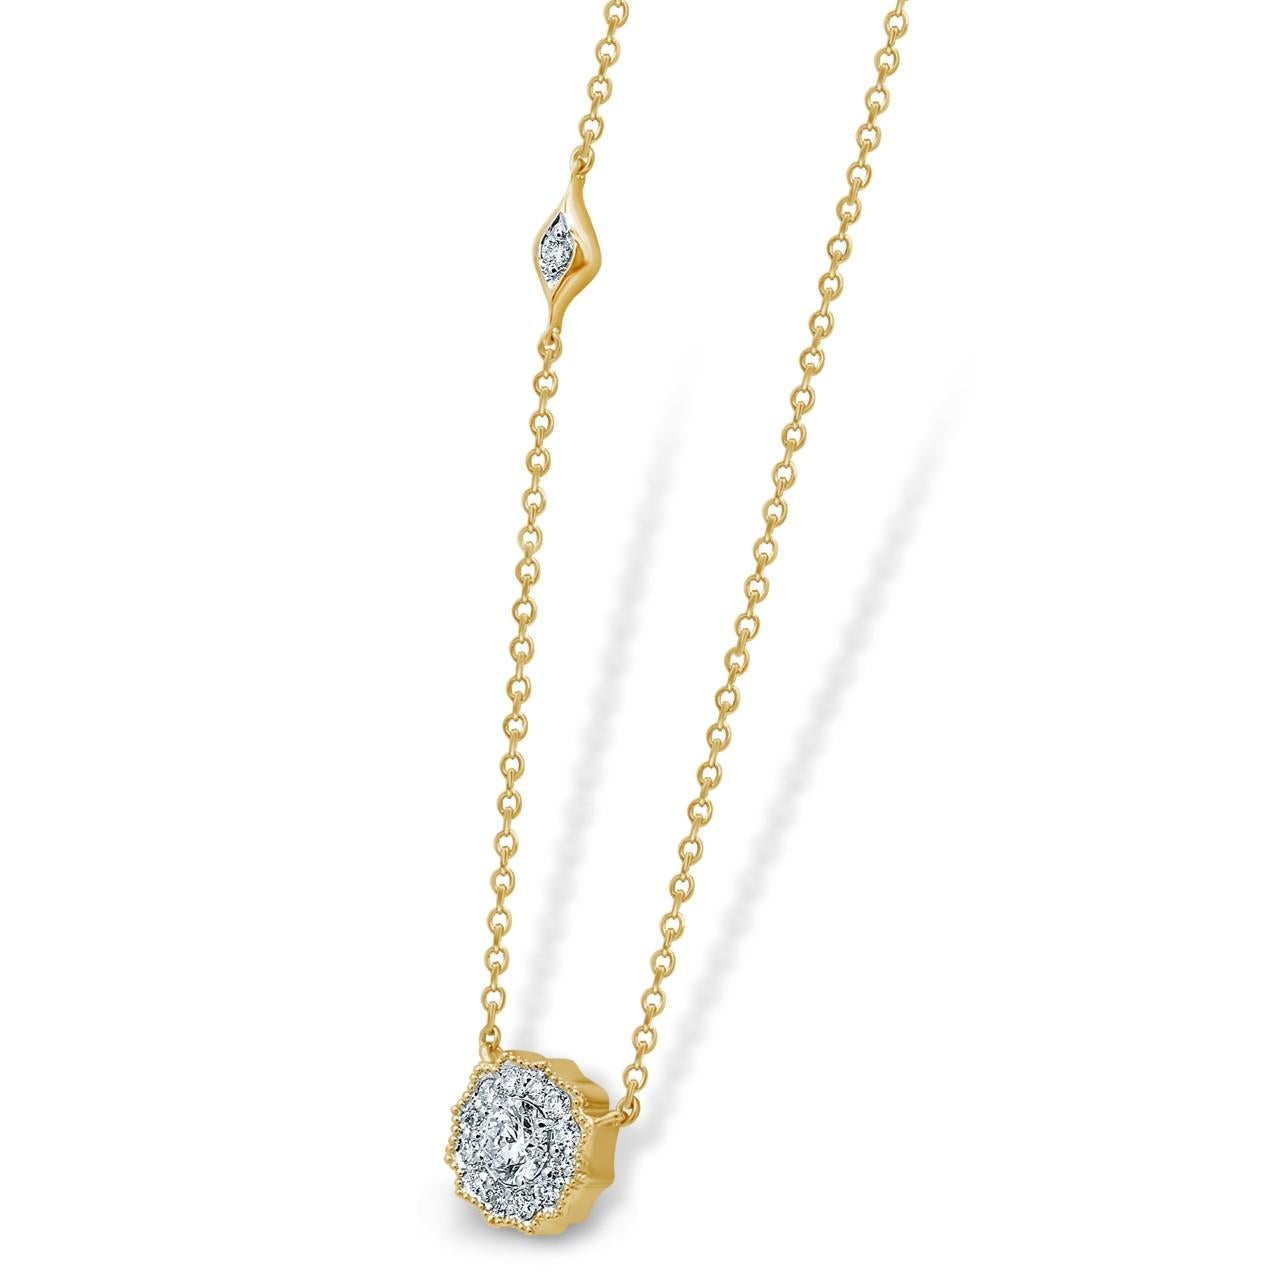 Cast from 18-karat gold, this pendant necklace is hand set with .48 carats of sparkling diamonds on the 16